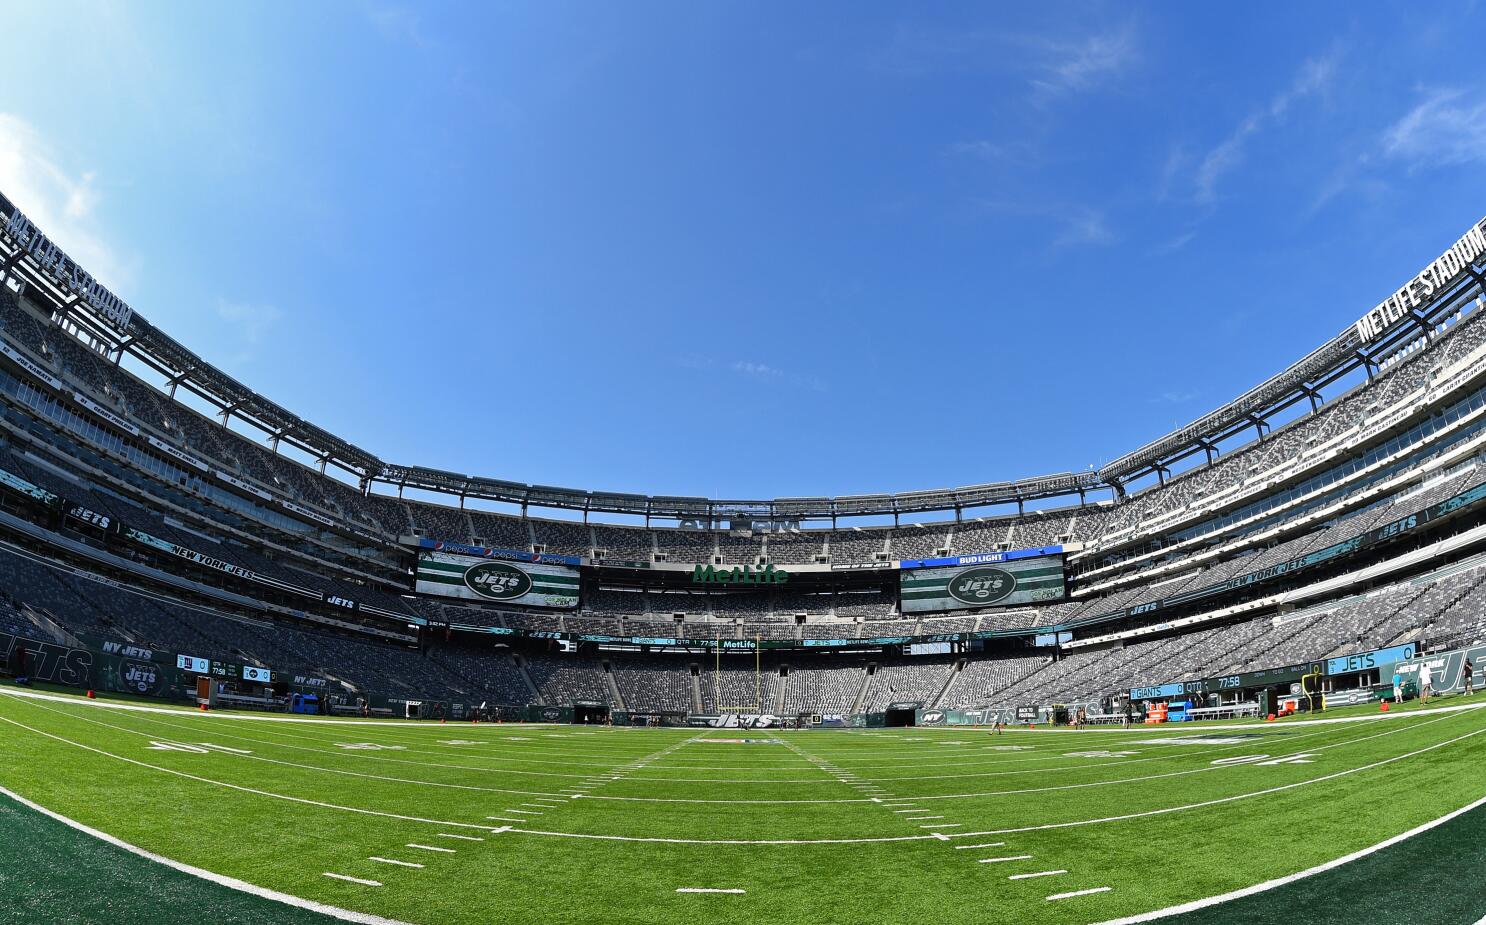 Jets recall being second-class citizens at Giants Stadium - Los